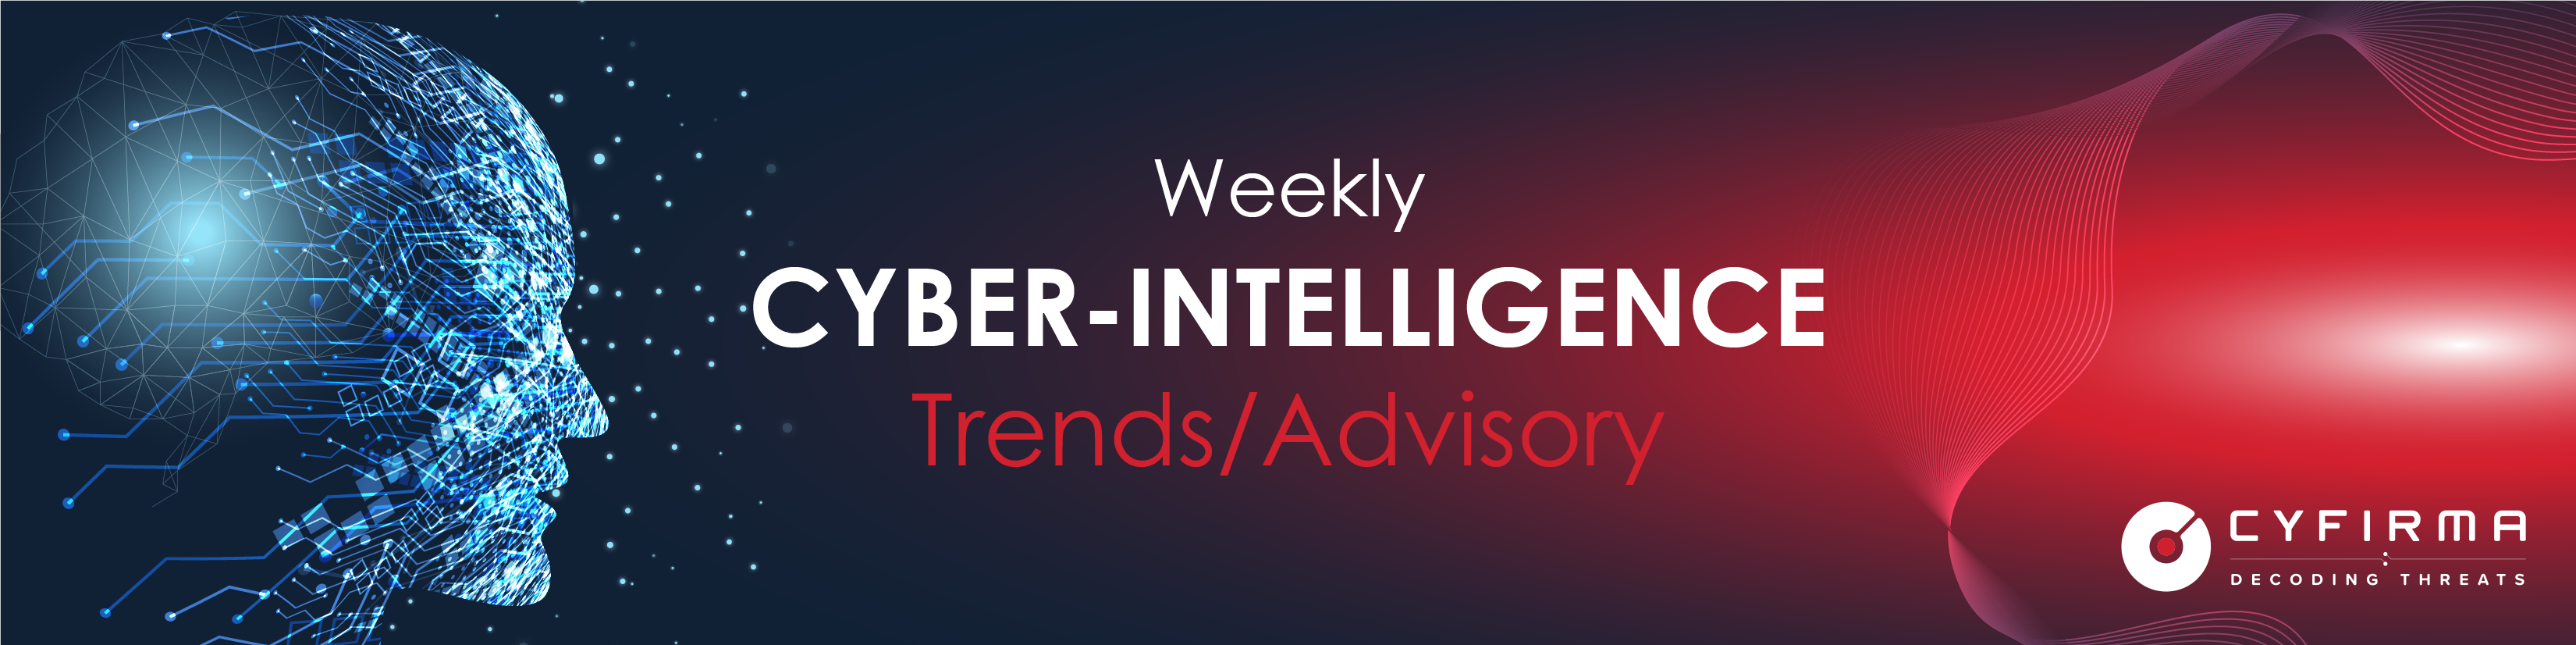 Weekly Cyber-Intelligence Trends and Advisory – 11 Mar 2022